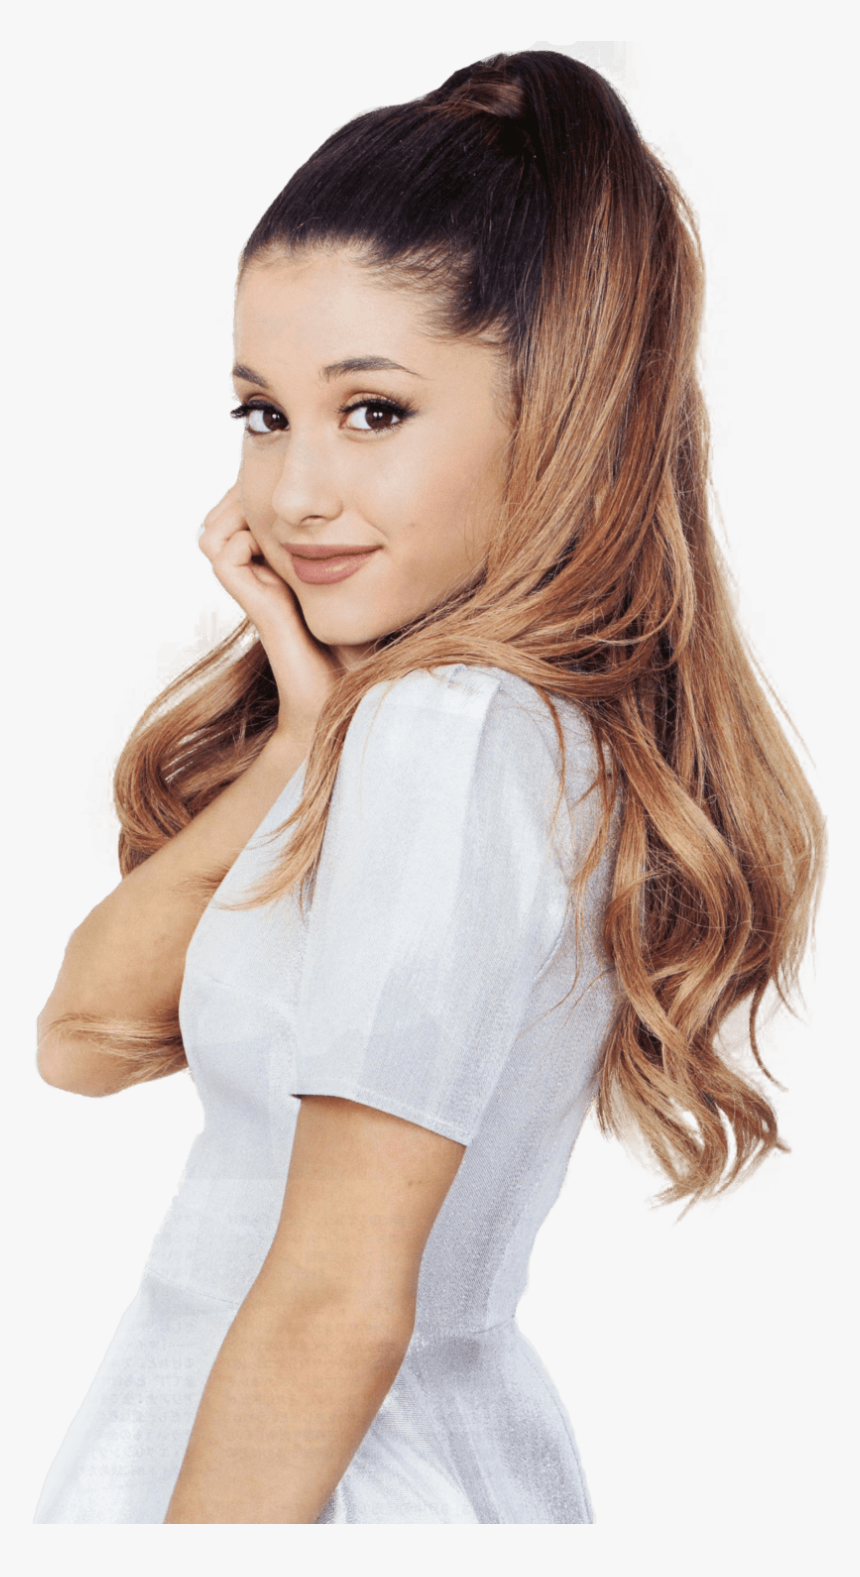 Sideview Ariana Grande - Ariana Grande Clear Background, HD Png Download, Free Download